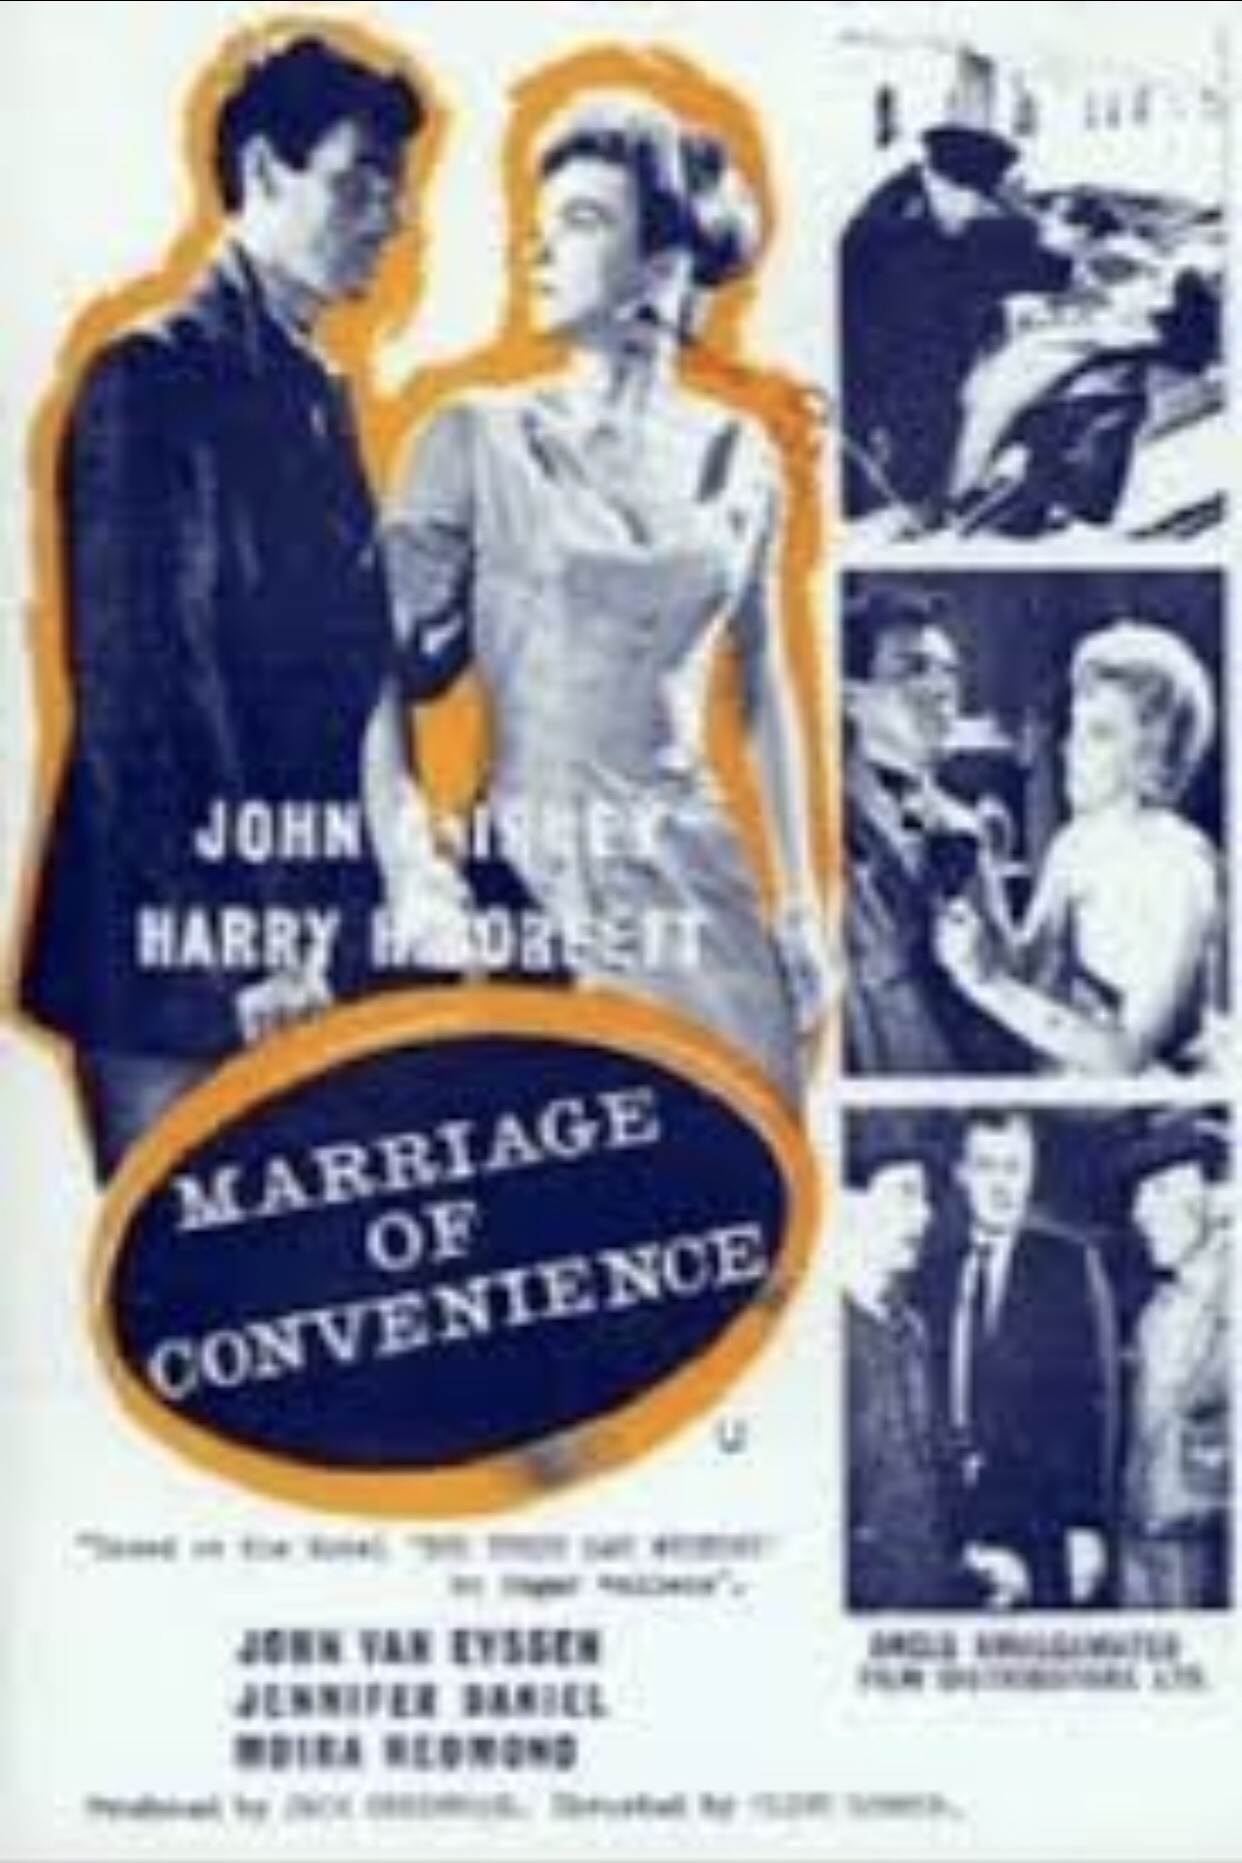 Marriage of Convenience (1960) Screenshot 1 